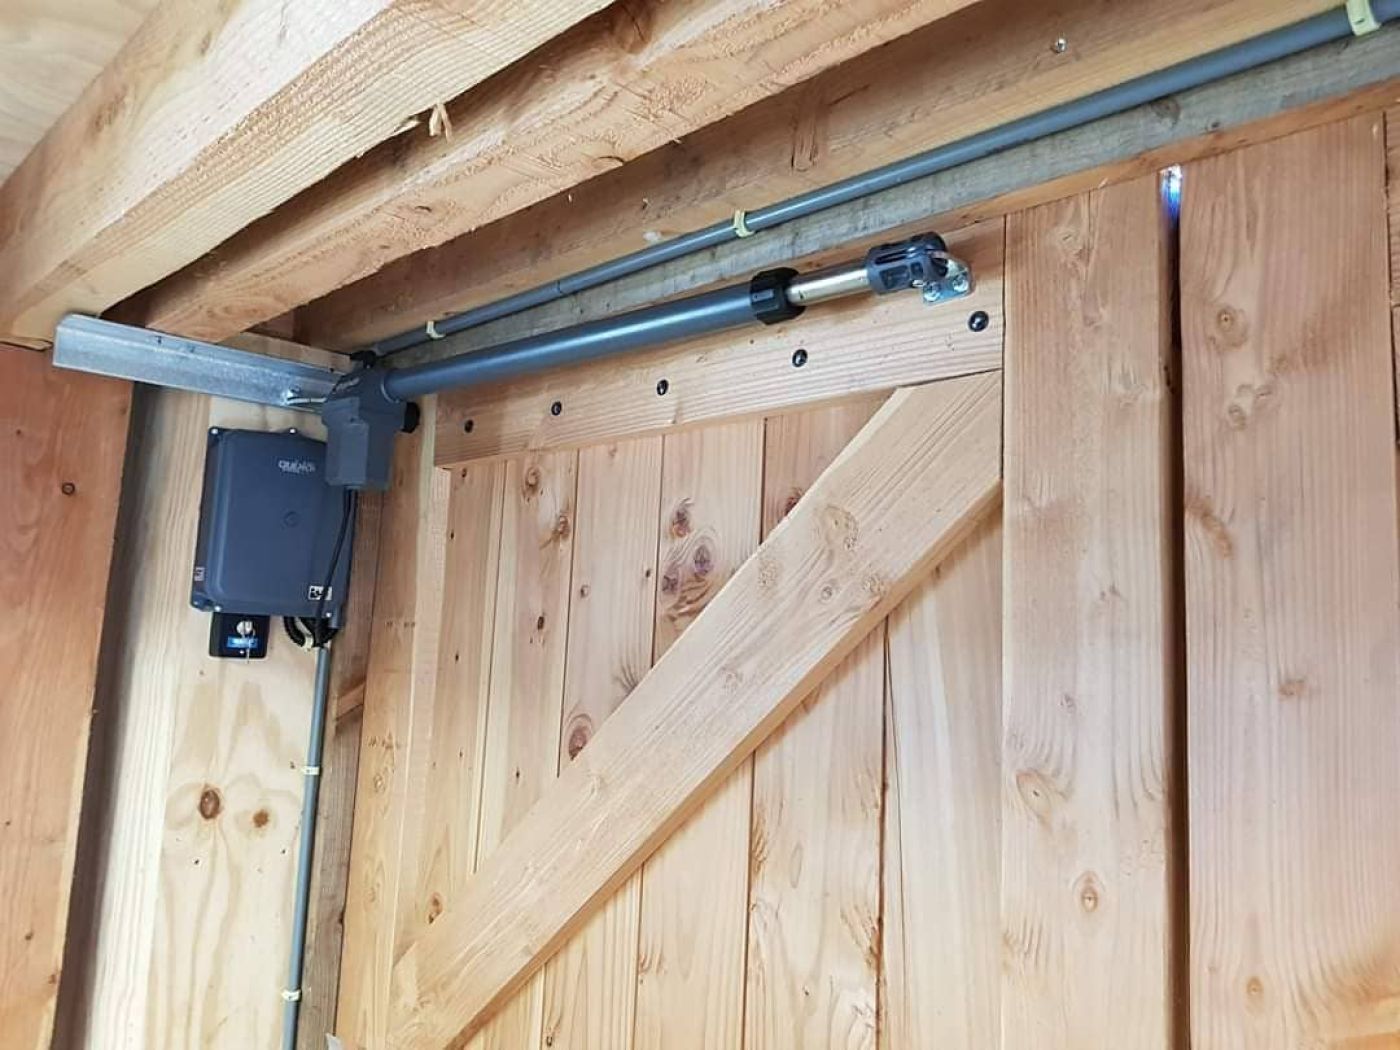 Many benefits of automation in garage door